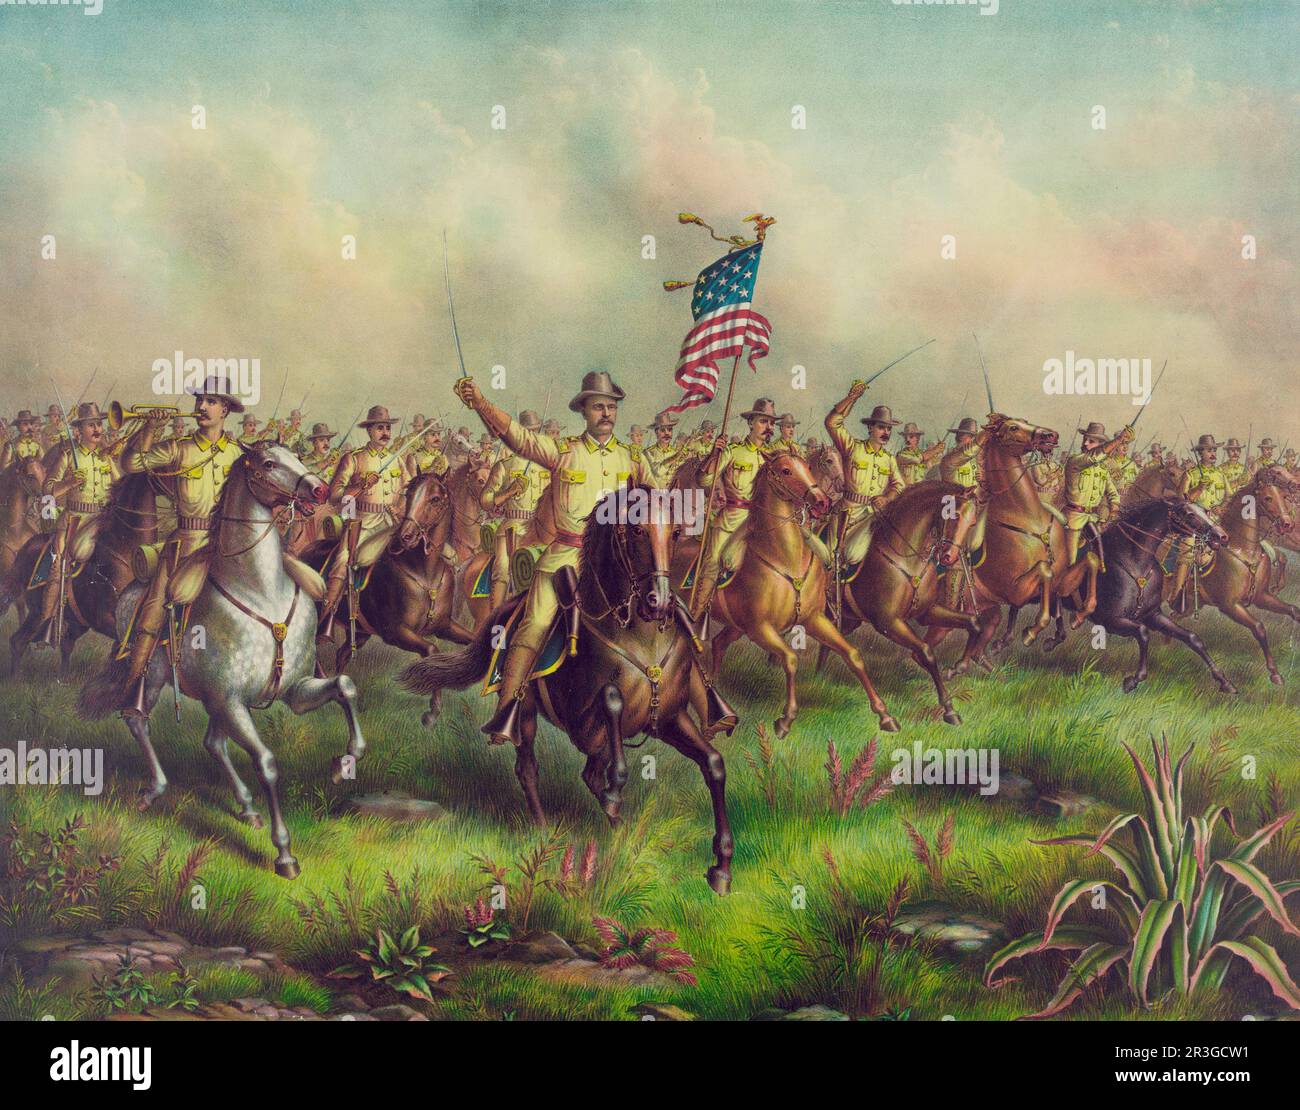 Colonel Theodore Roosevelt leading the Rough Riders. Stock Photo